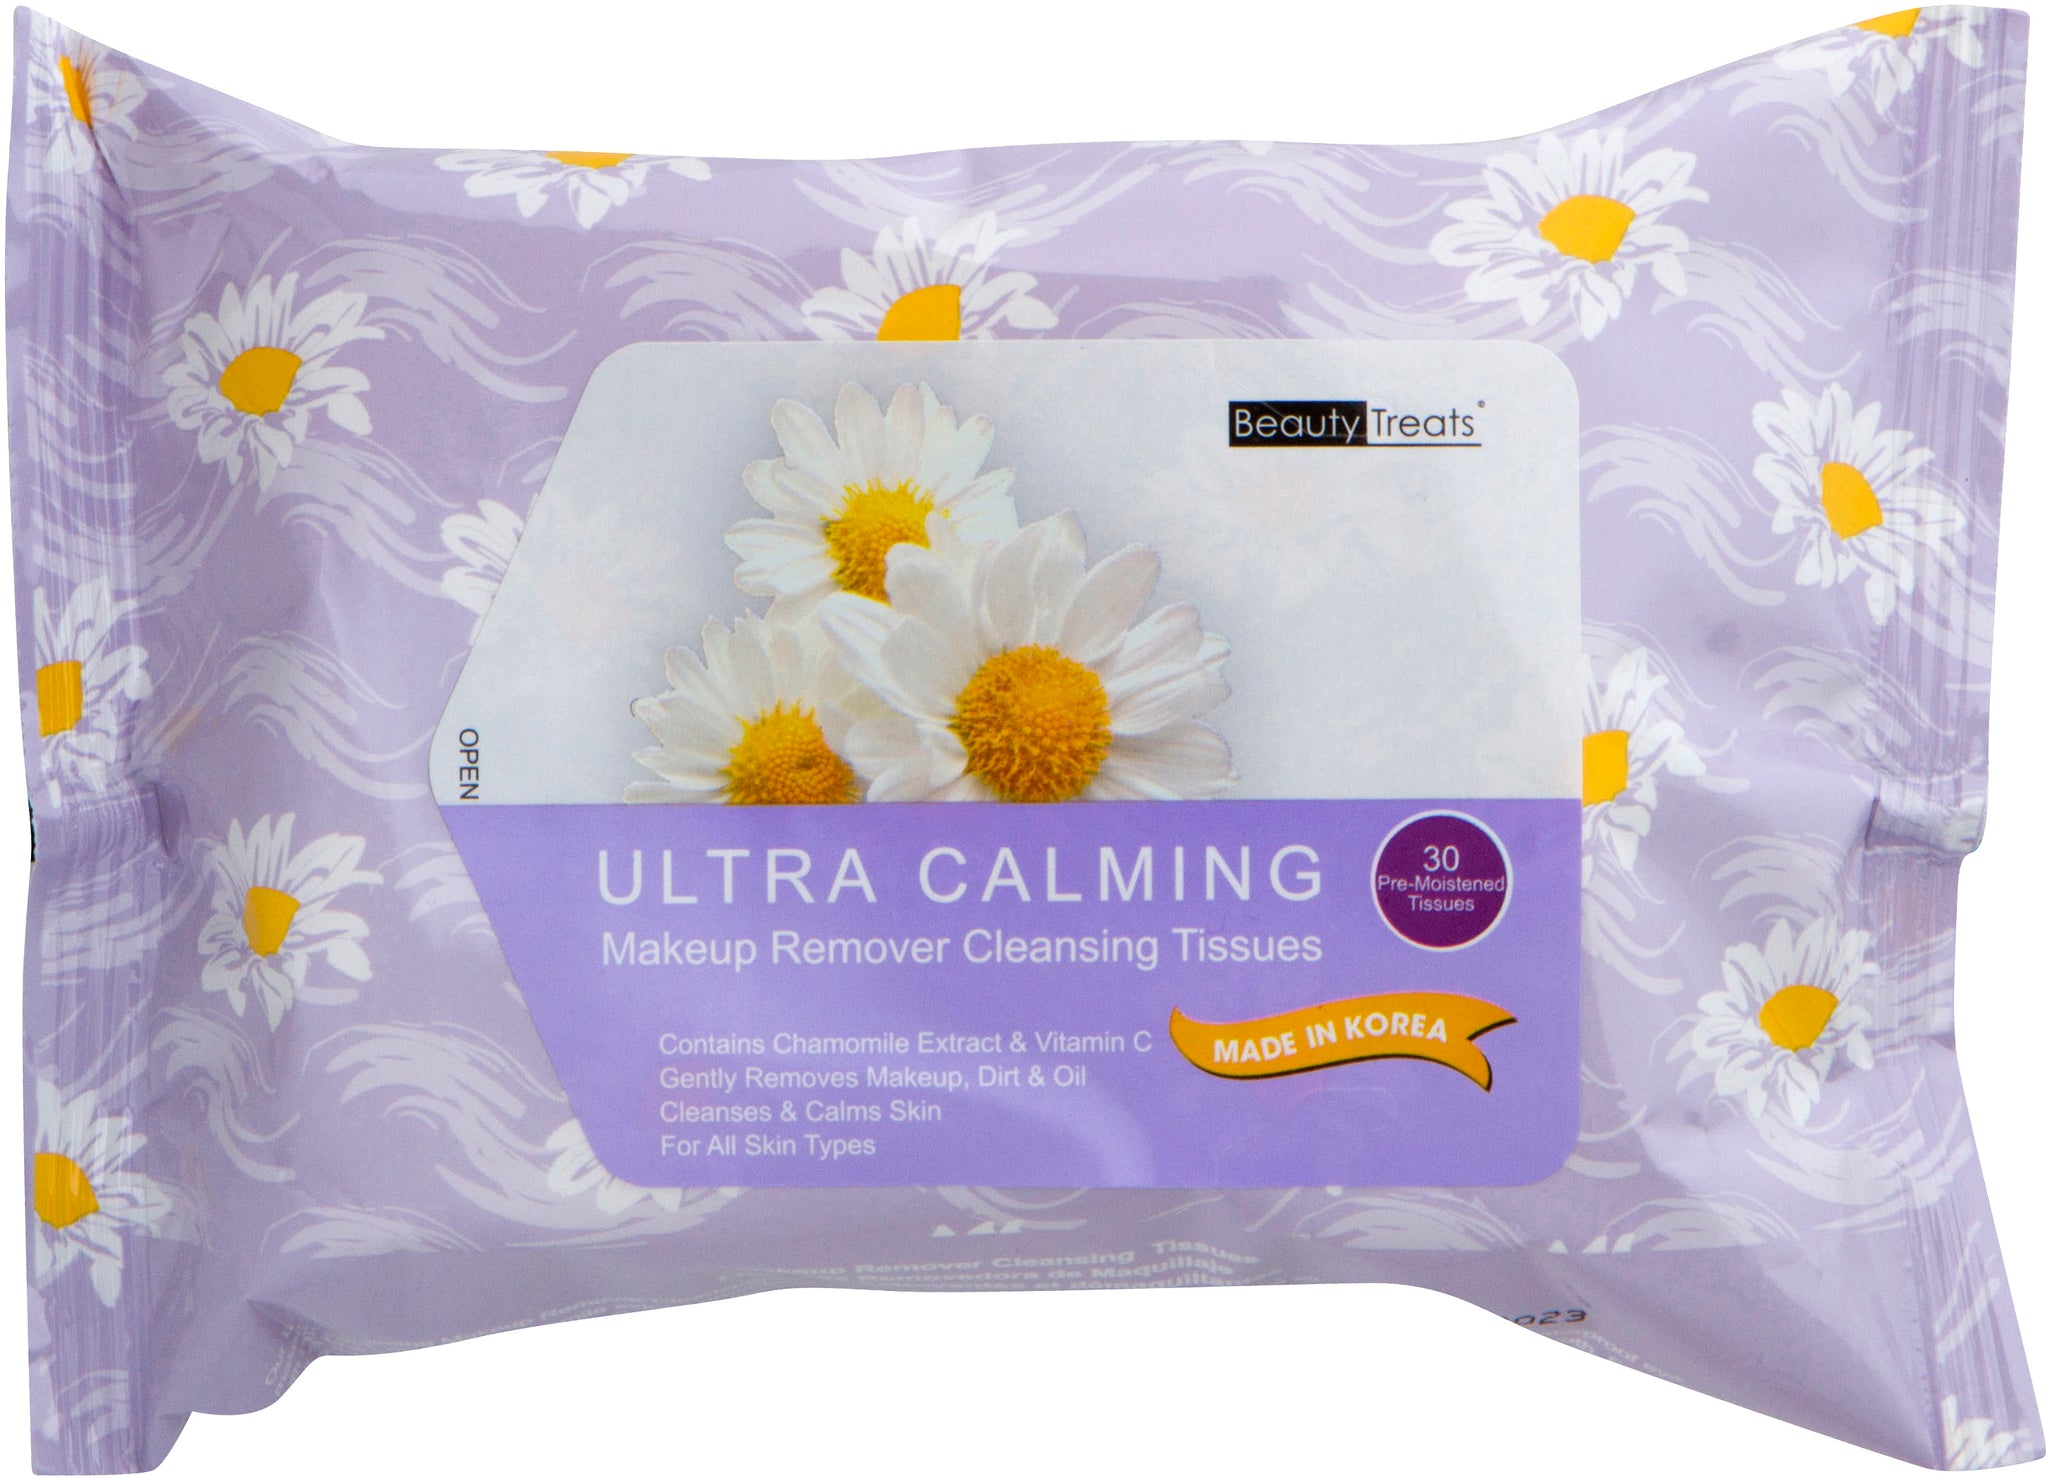 Ultra Calming Makeup Remover Cleansing